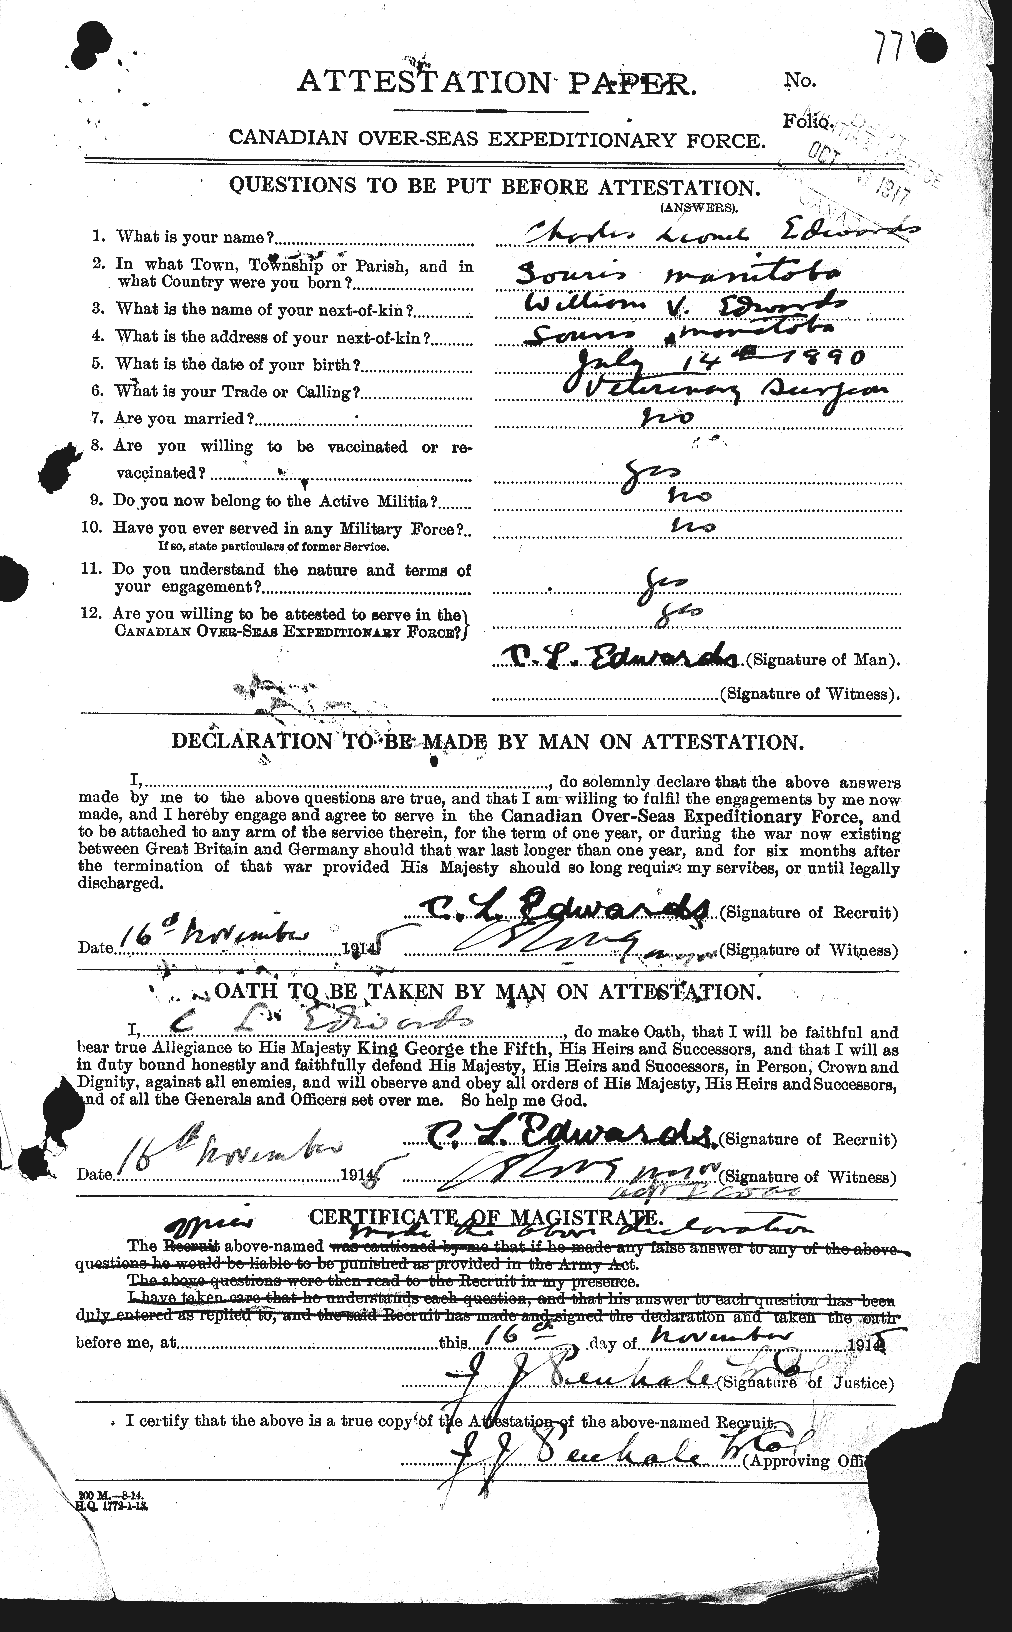 Personnel Records of the First World War - CEF 307846a